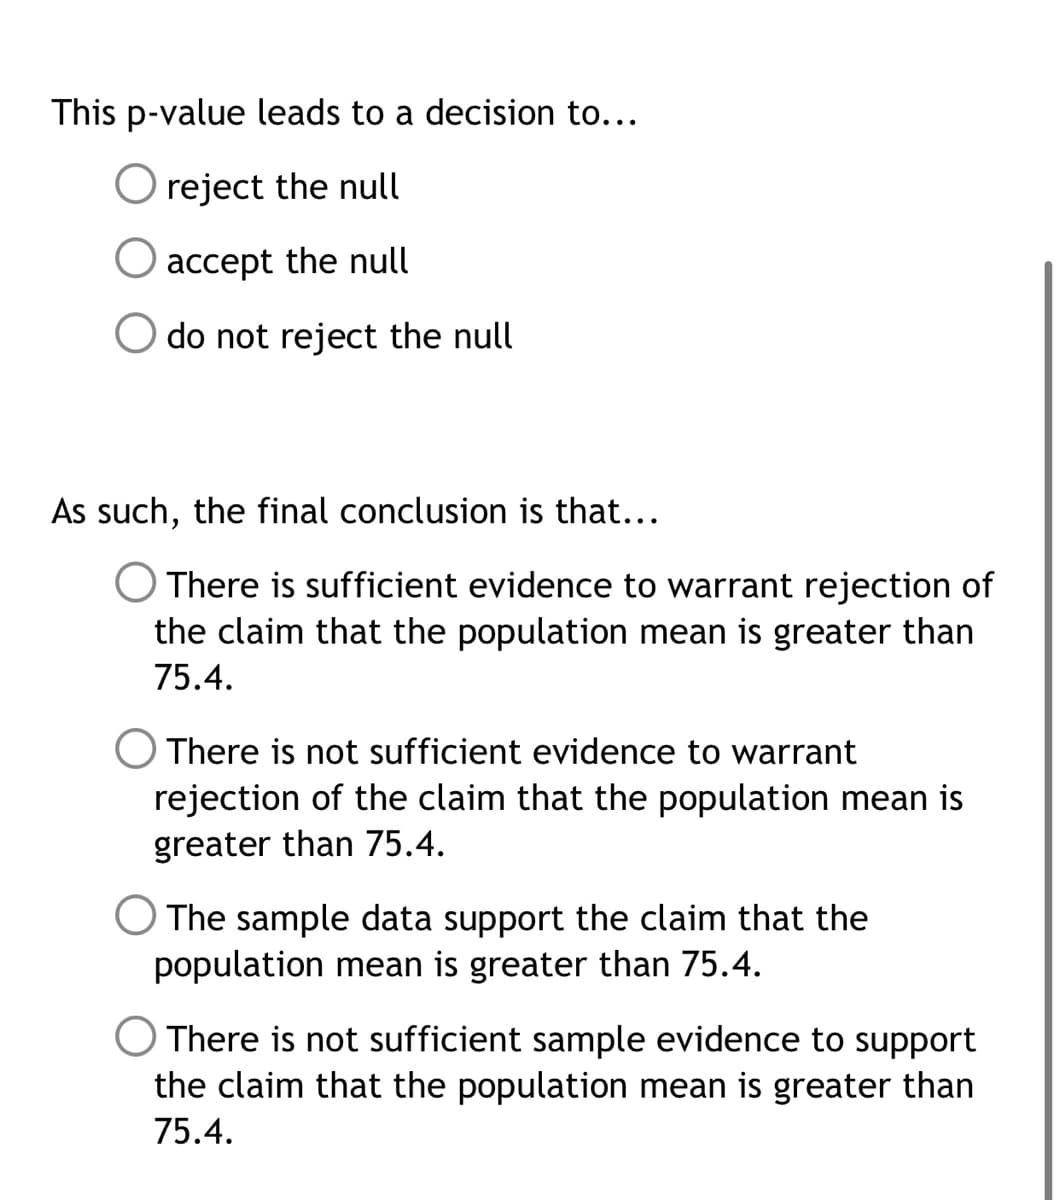 This p-value leads to a decision to...
O reject the null
accept the null
do not reject the null
As such, the final conclusion is that...
O There is sufficient evidence to warrant rejection of
the claim that the population mean is greater than
75.4.
There is not sufficient evidence to warrant
rejection of the claim that the population mean is
greater than 75.4.
O The sample data support the claim that the
population mean is greater than 75.4.
O There is not sufficient sample evidence to support
the claim that the population mean is greater than
75.4.
